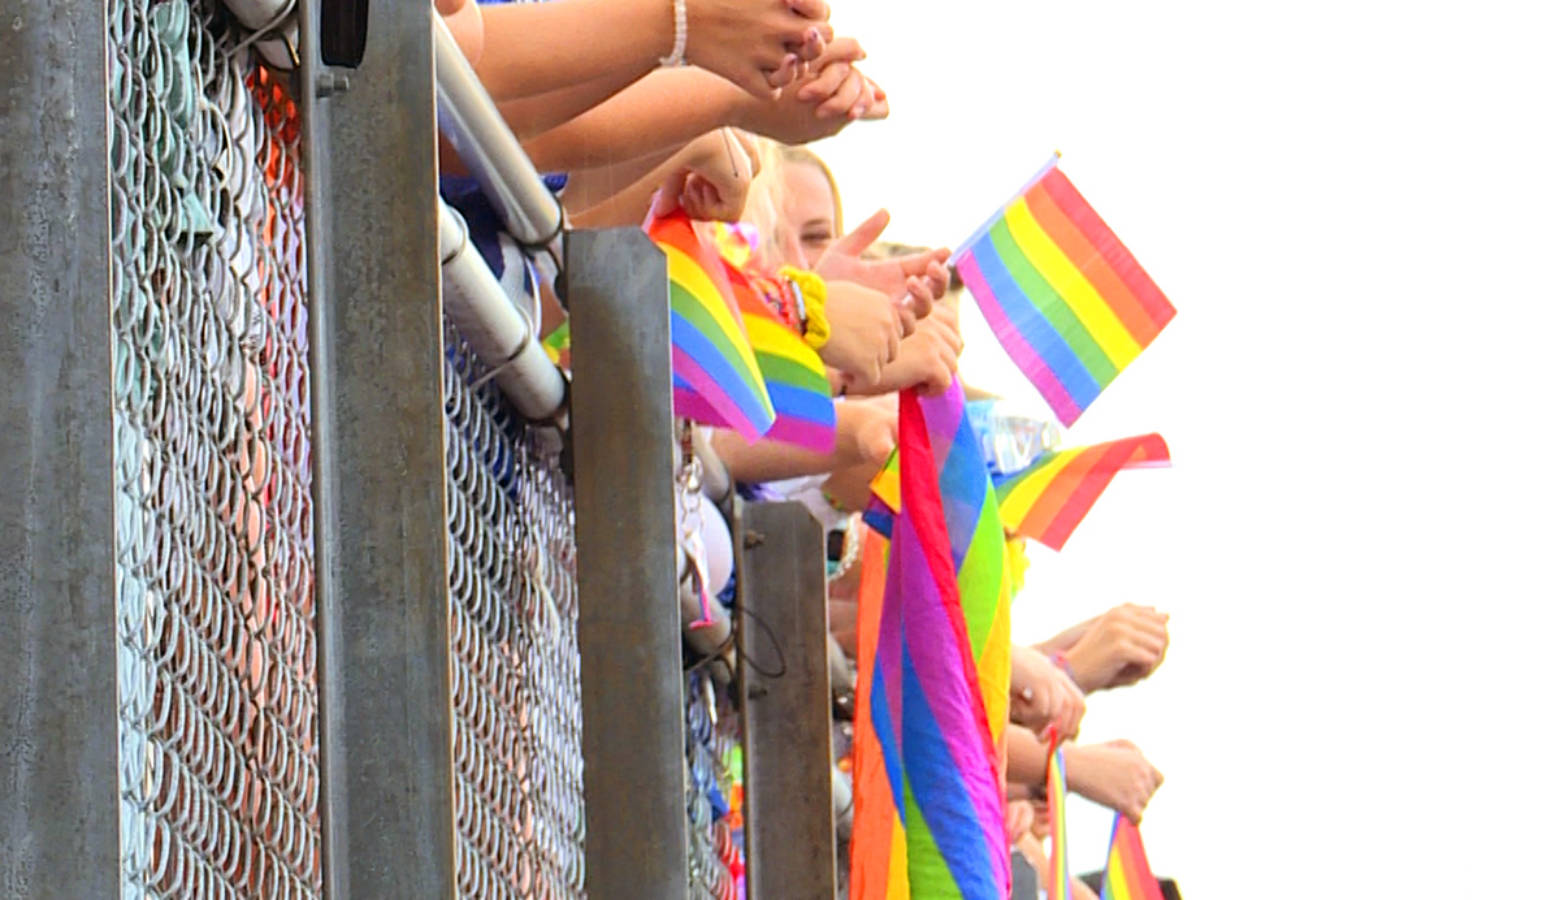 Students at a Roncalli football game wave rainbow flags to support counselor Shelley Fitzgerald. State Superintendent Jennifer McCormick says the situation brought attention to voucher schools with discriminatory practices. (Lauren Chapman/IPB News)